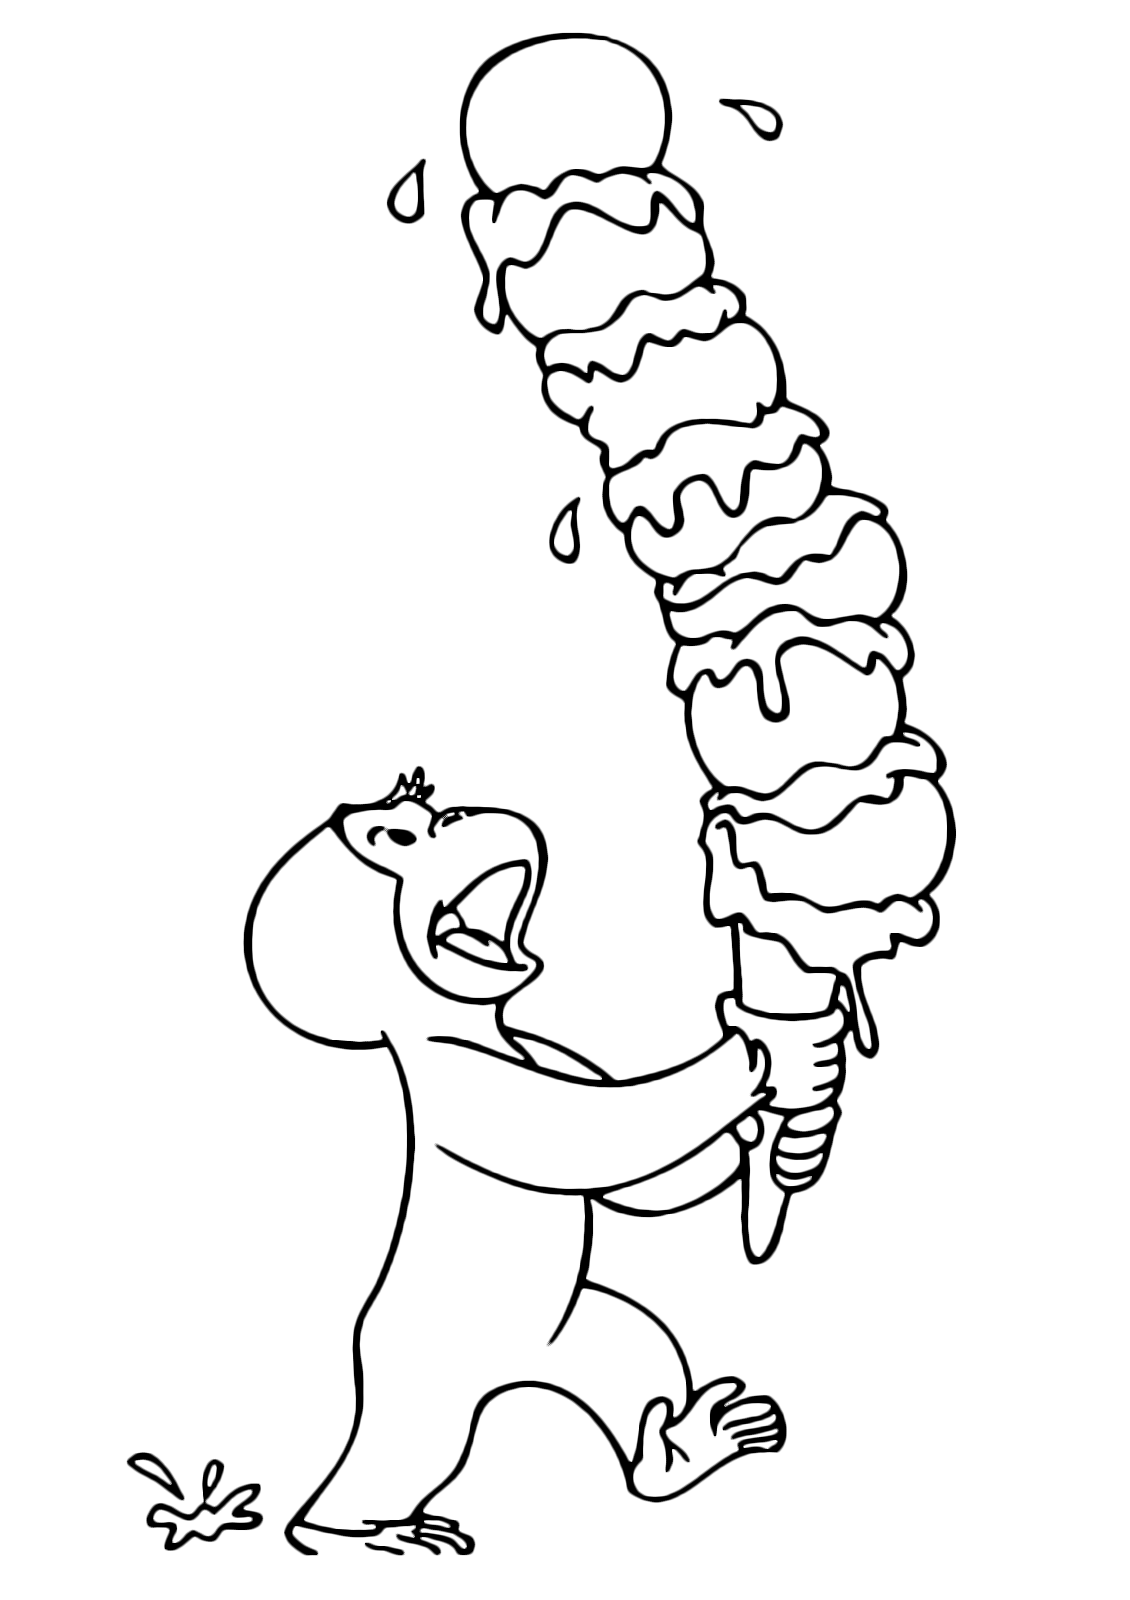 Curious George - George looks happy his tower of ice cream